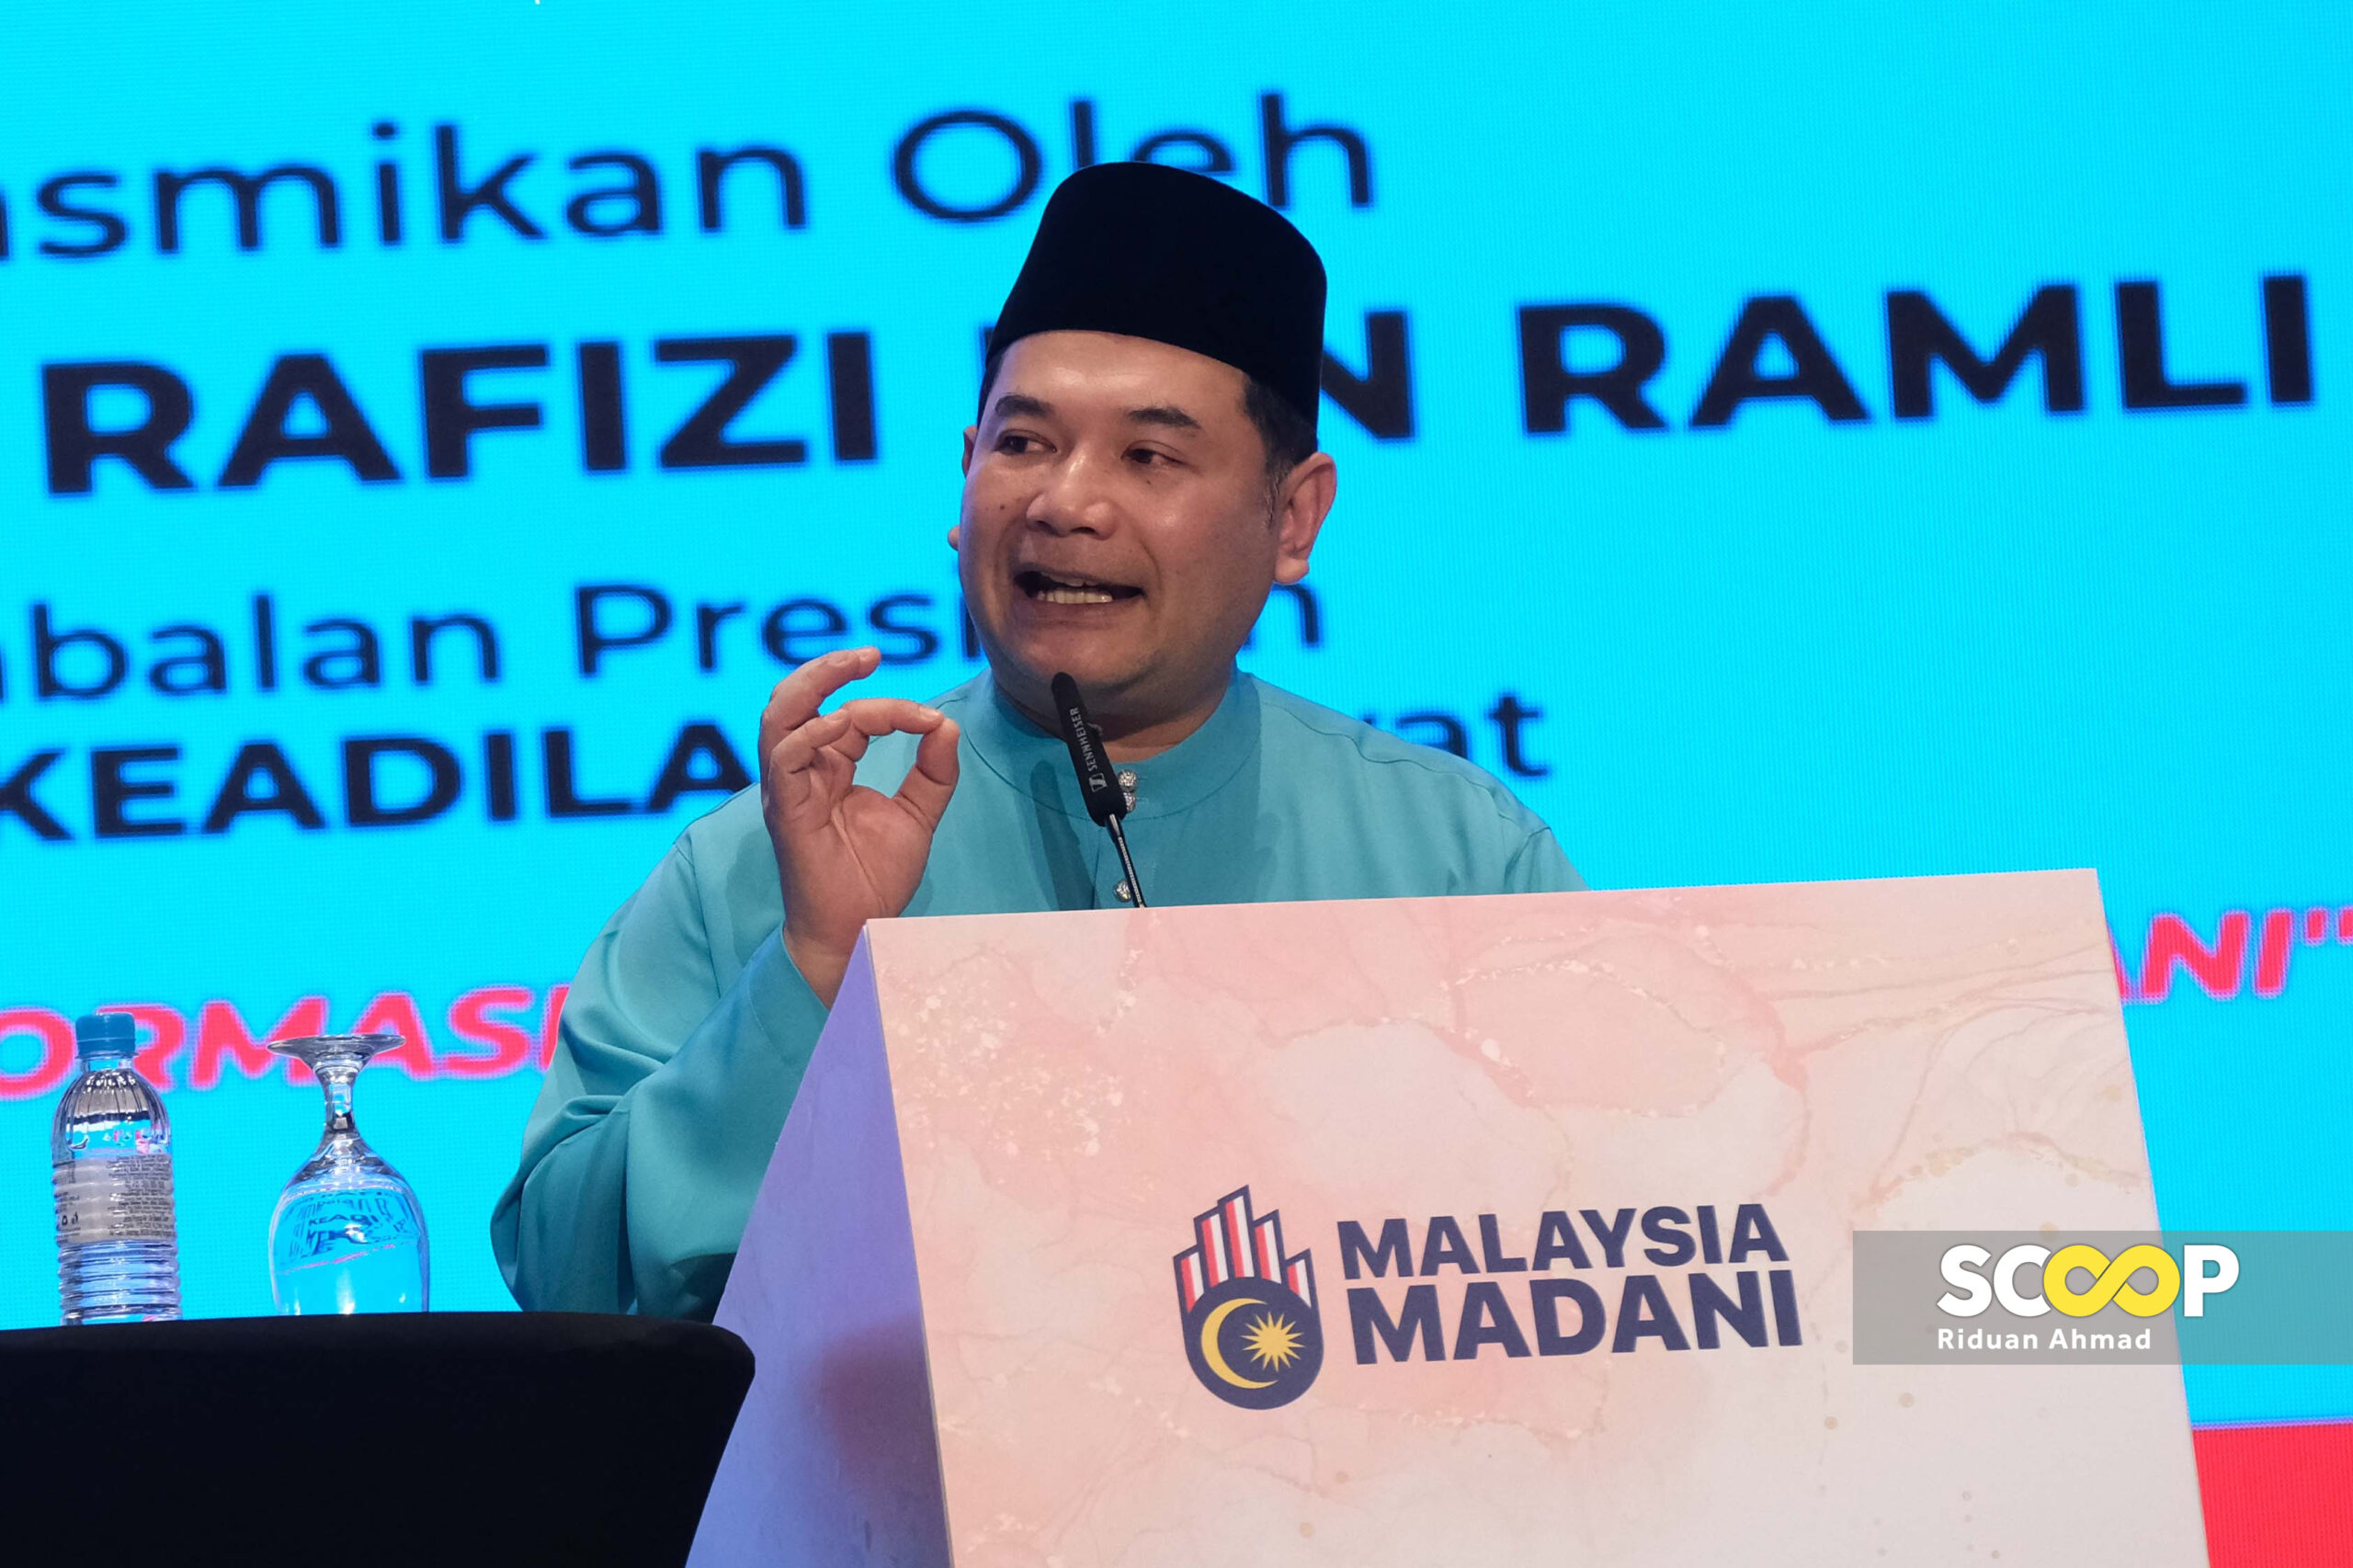 Attempts to defame Anwar will continue to fail, says Rafizi